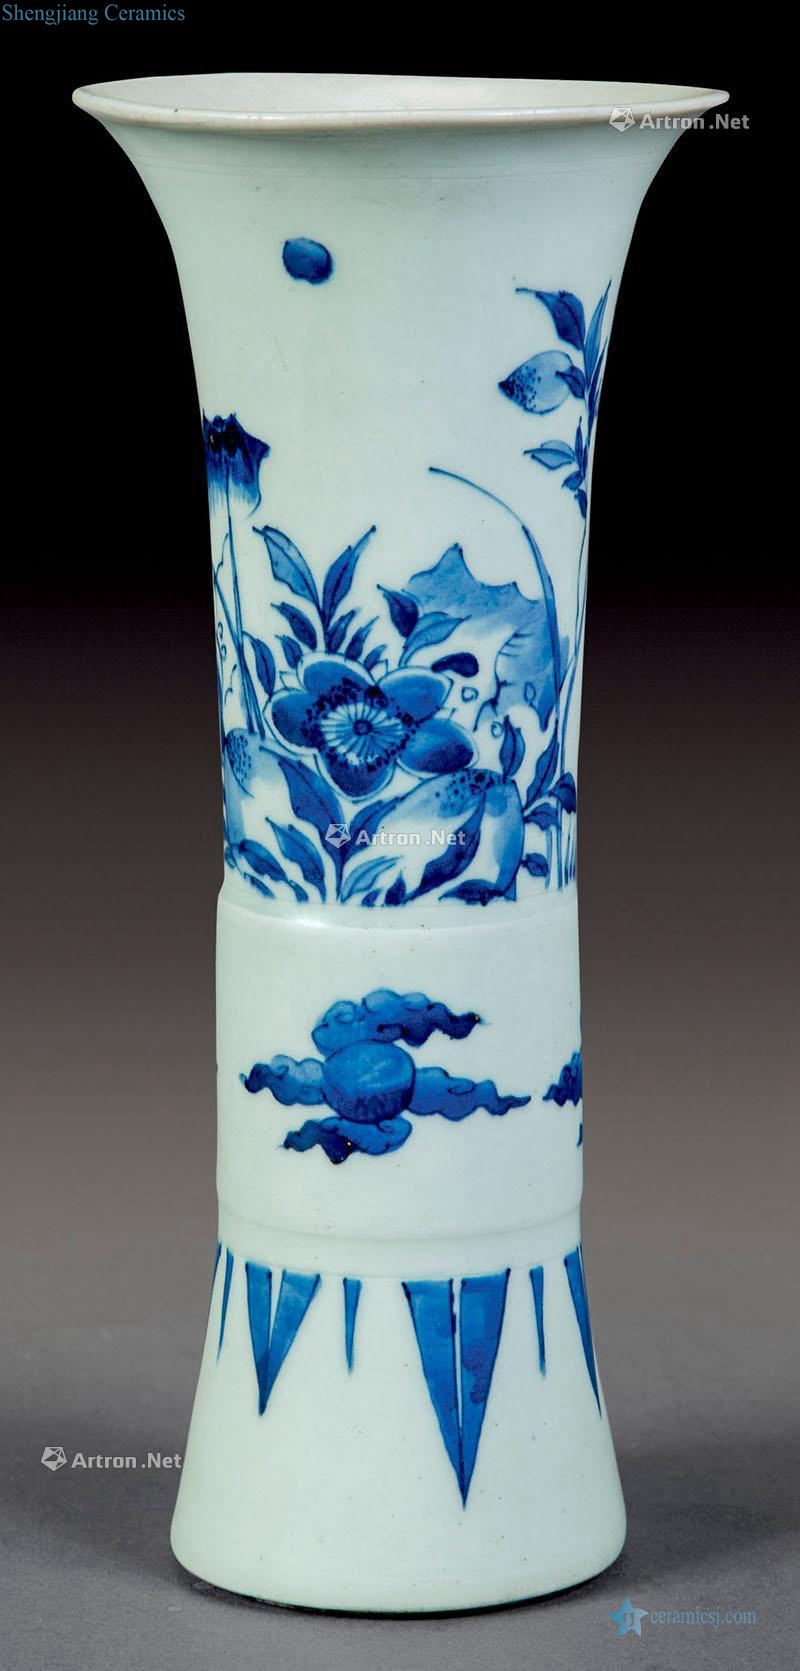 In the early qing dynasty Blue and white flower vase with flowers